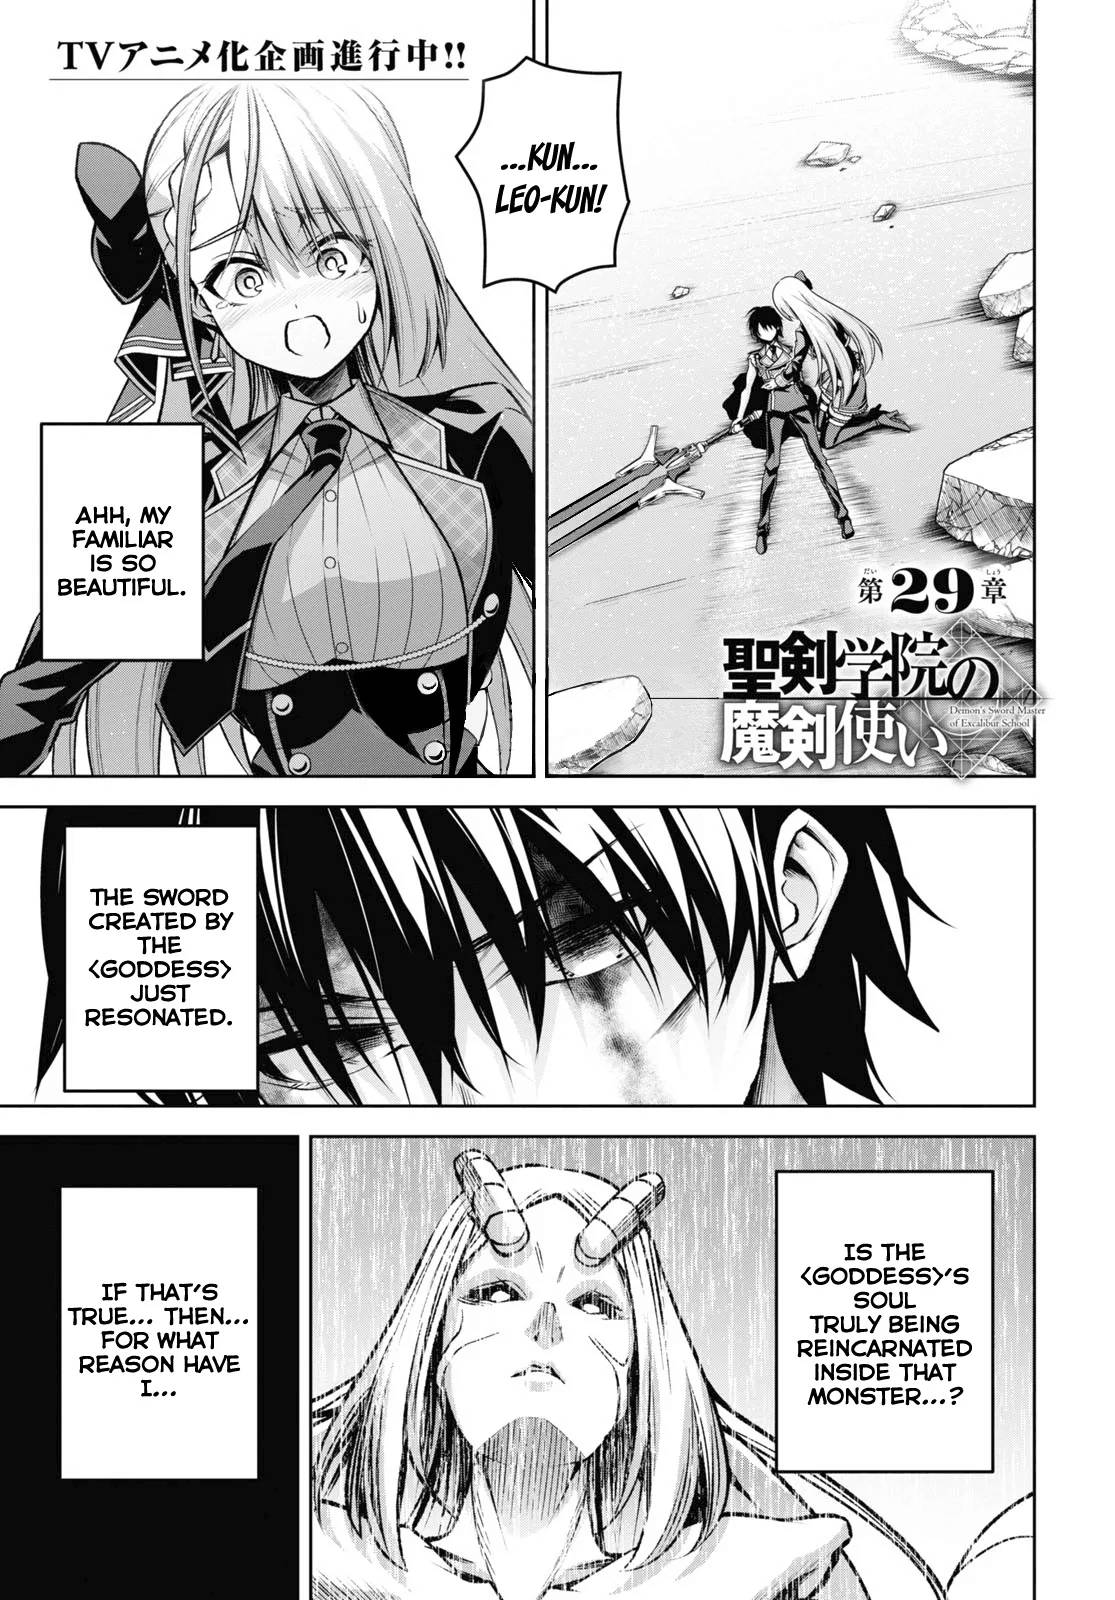 The Demon Sword Master of Excalibur Academy chapter 32 - English